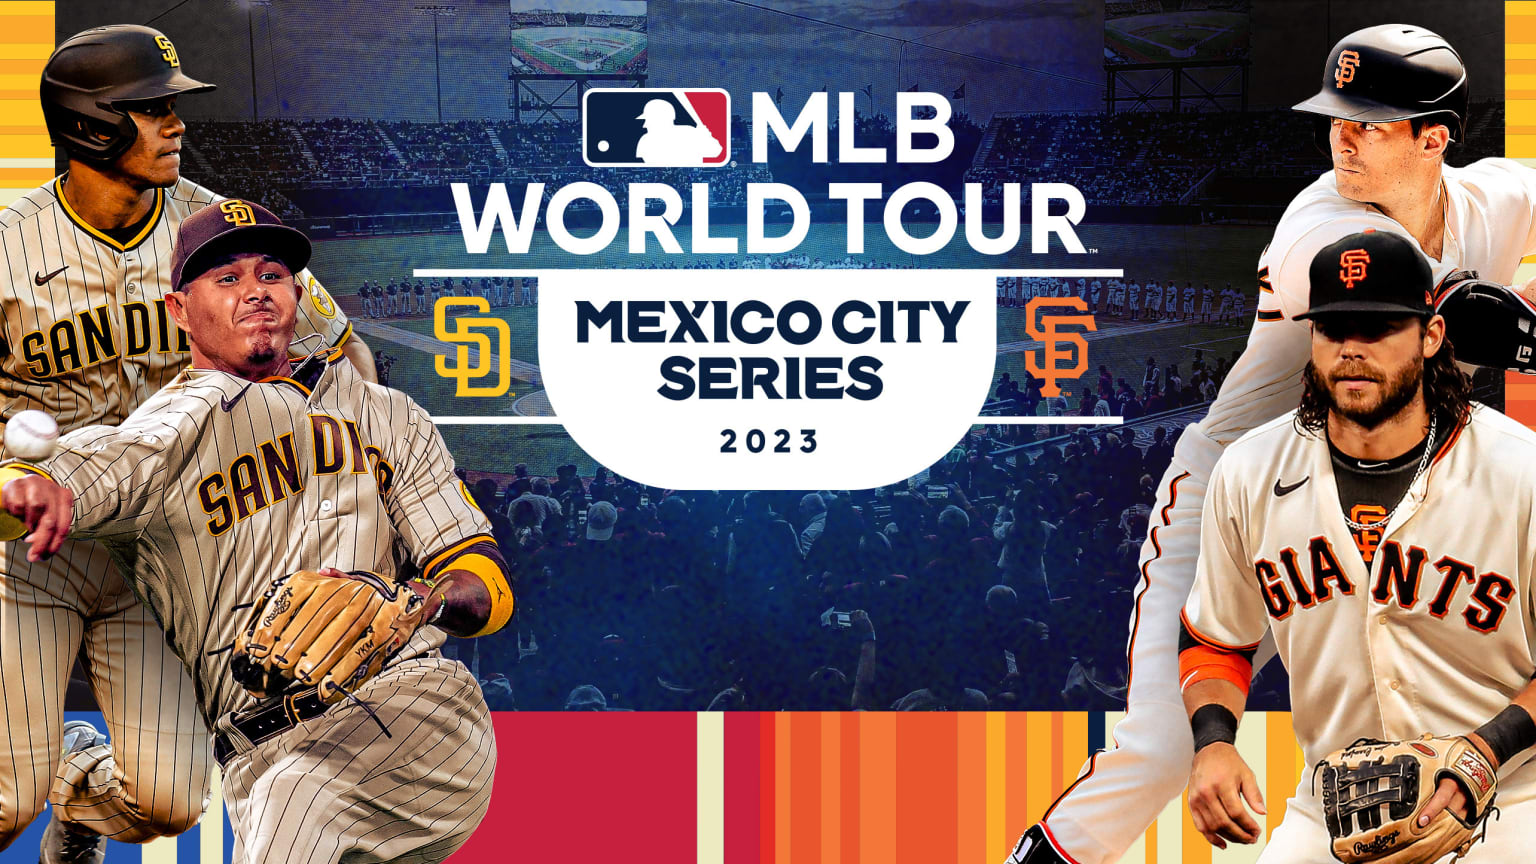 Juan Soto, Manny Machado, Brandon Crawford and Mike Yastrzemski are shown on both sides of an image featuring the Padres and Giants logos promoting the MLB World Tour Mexico City Series 2023 